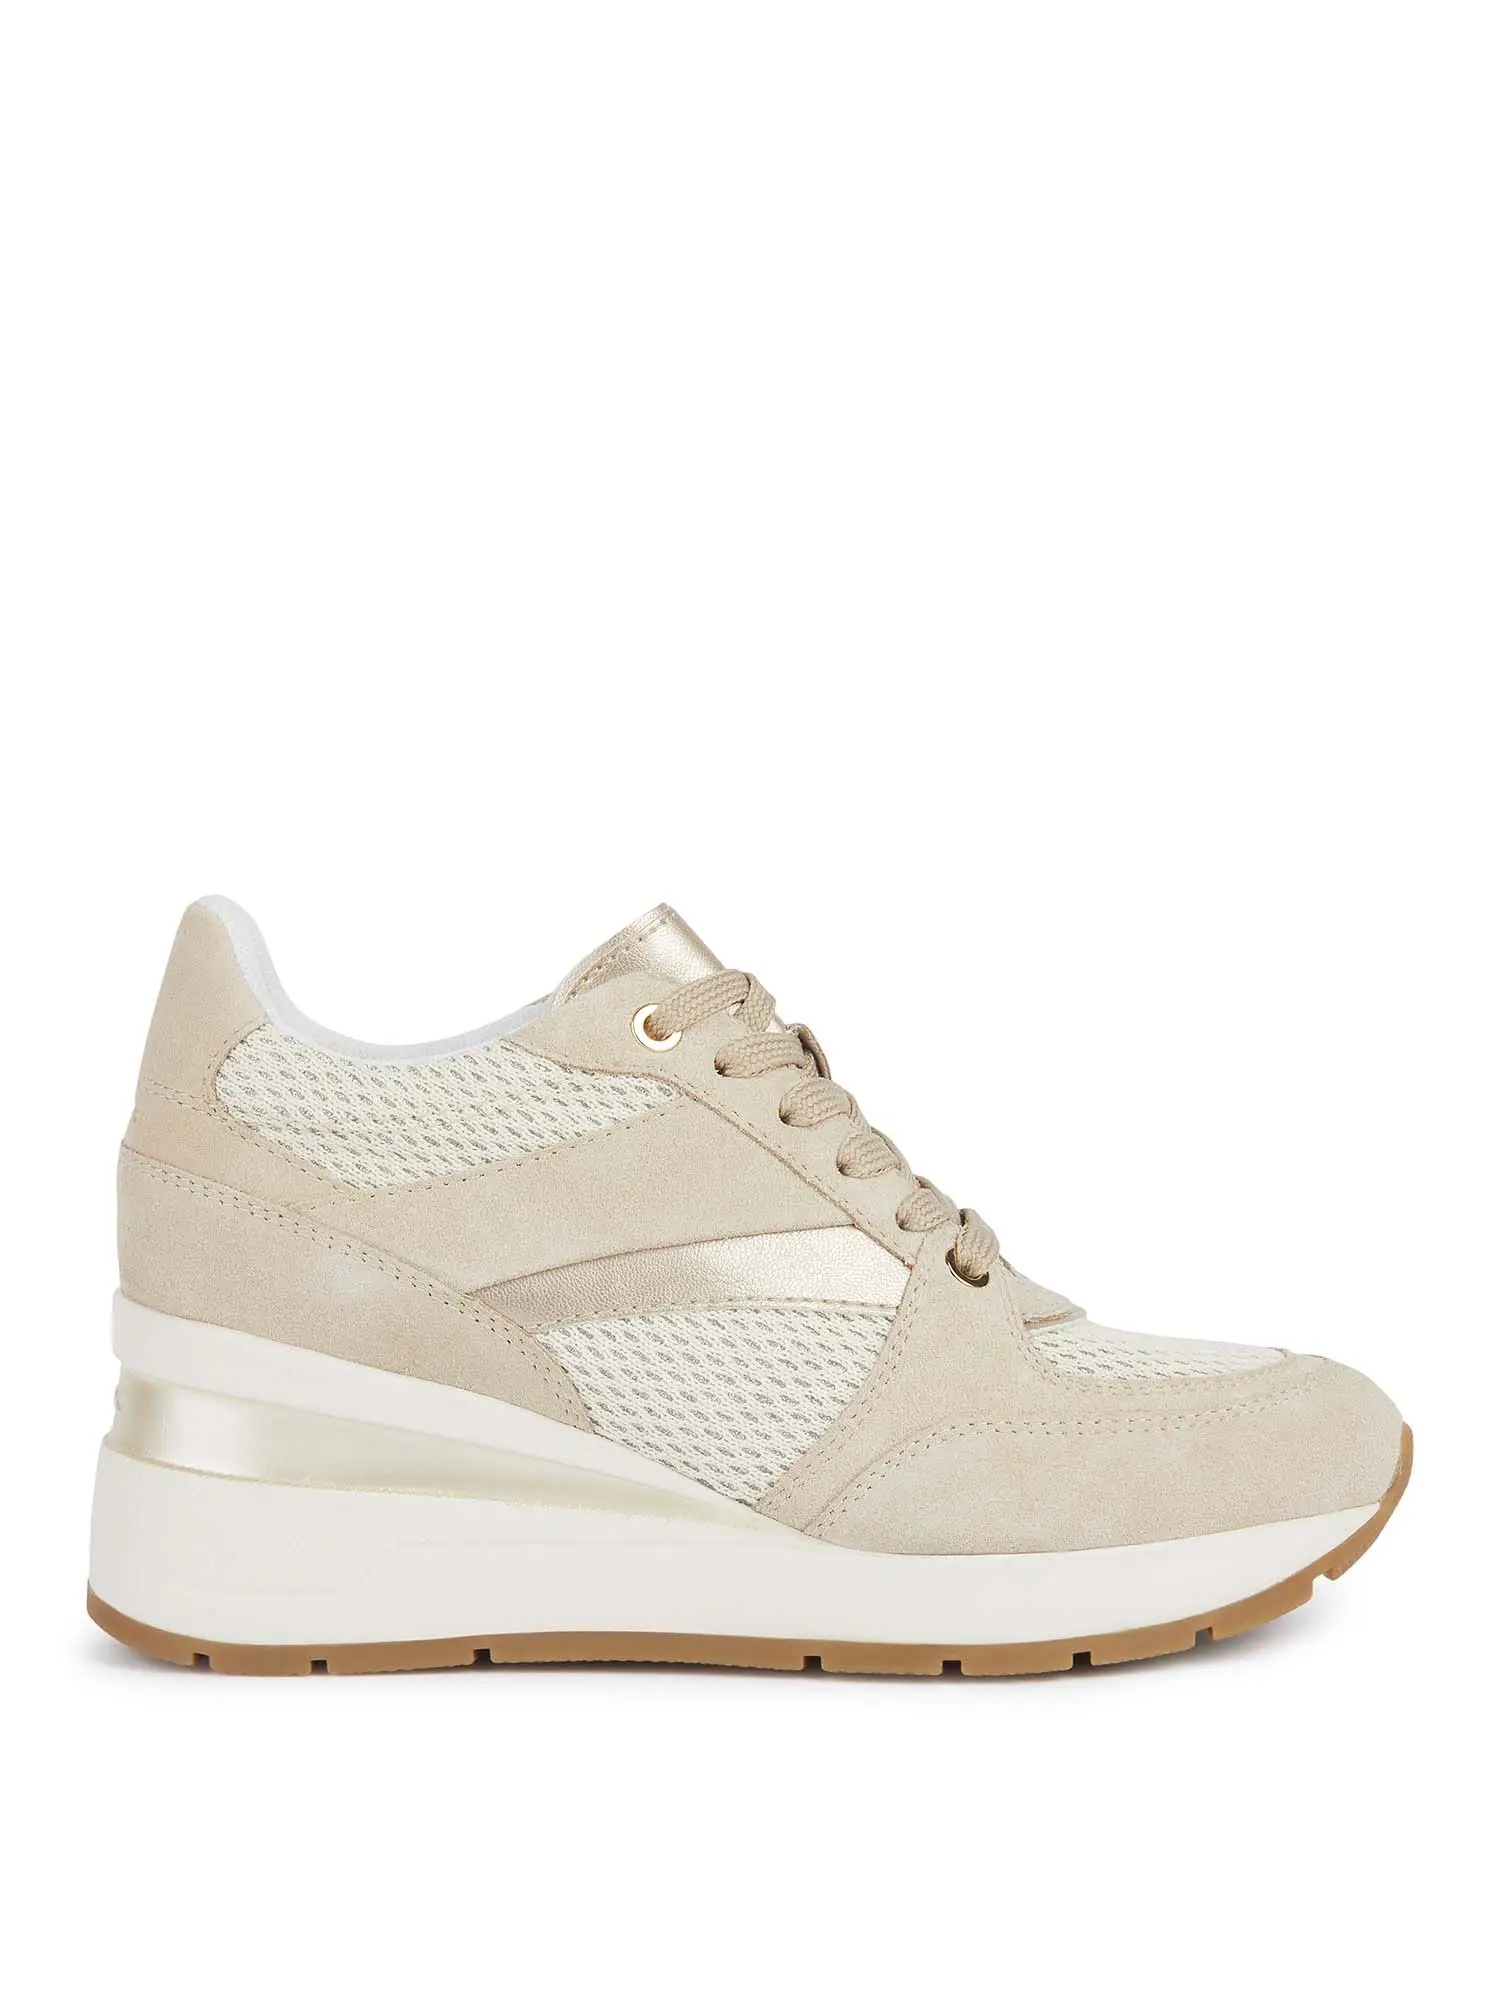 SNEAKERS DONNA - GEOX - D368LA 0AS22 - BEIGE/TAUPE, 40